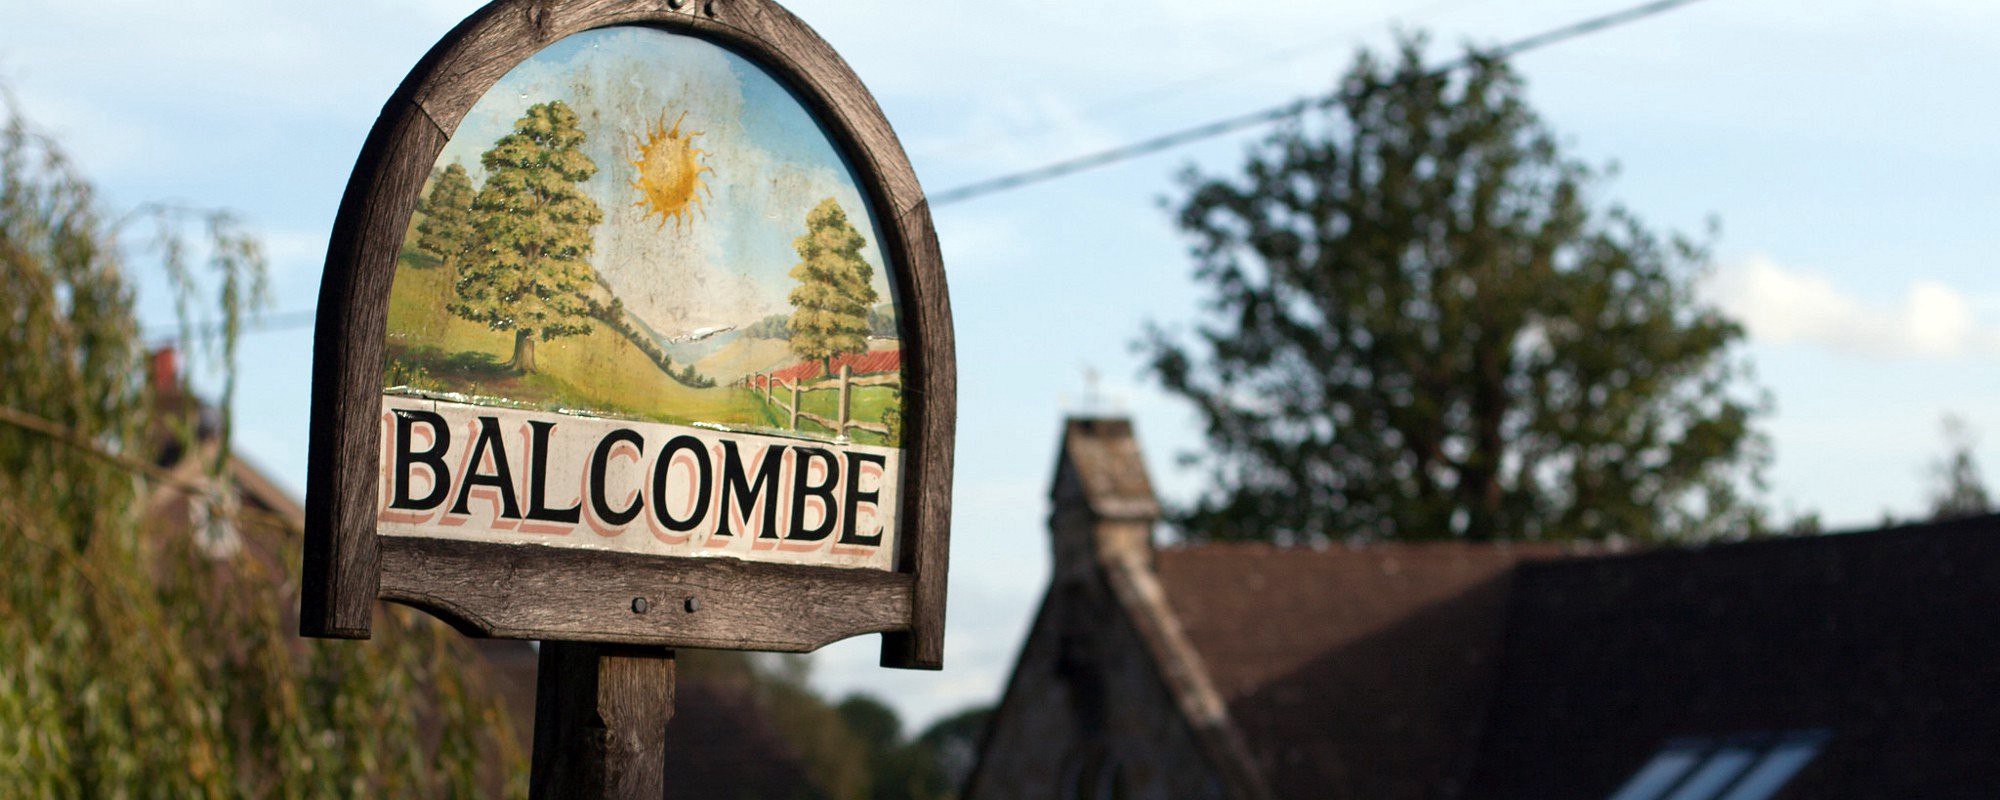 Balcombe's village sign, with the primary school in the background.